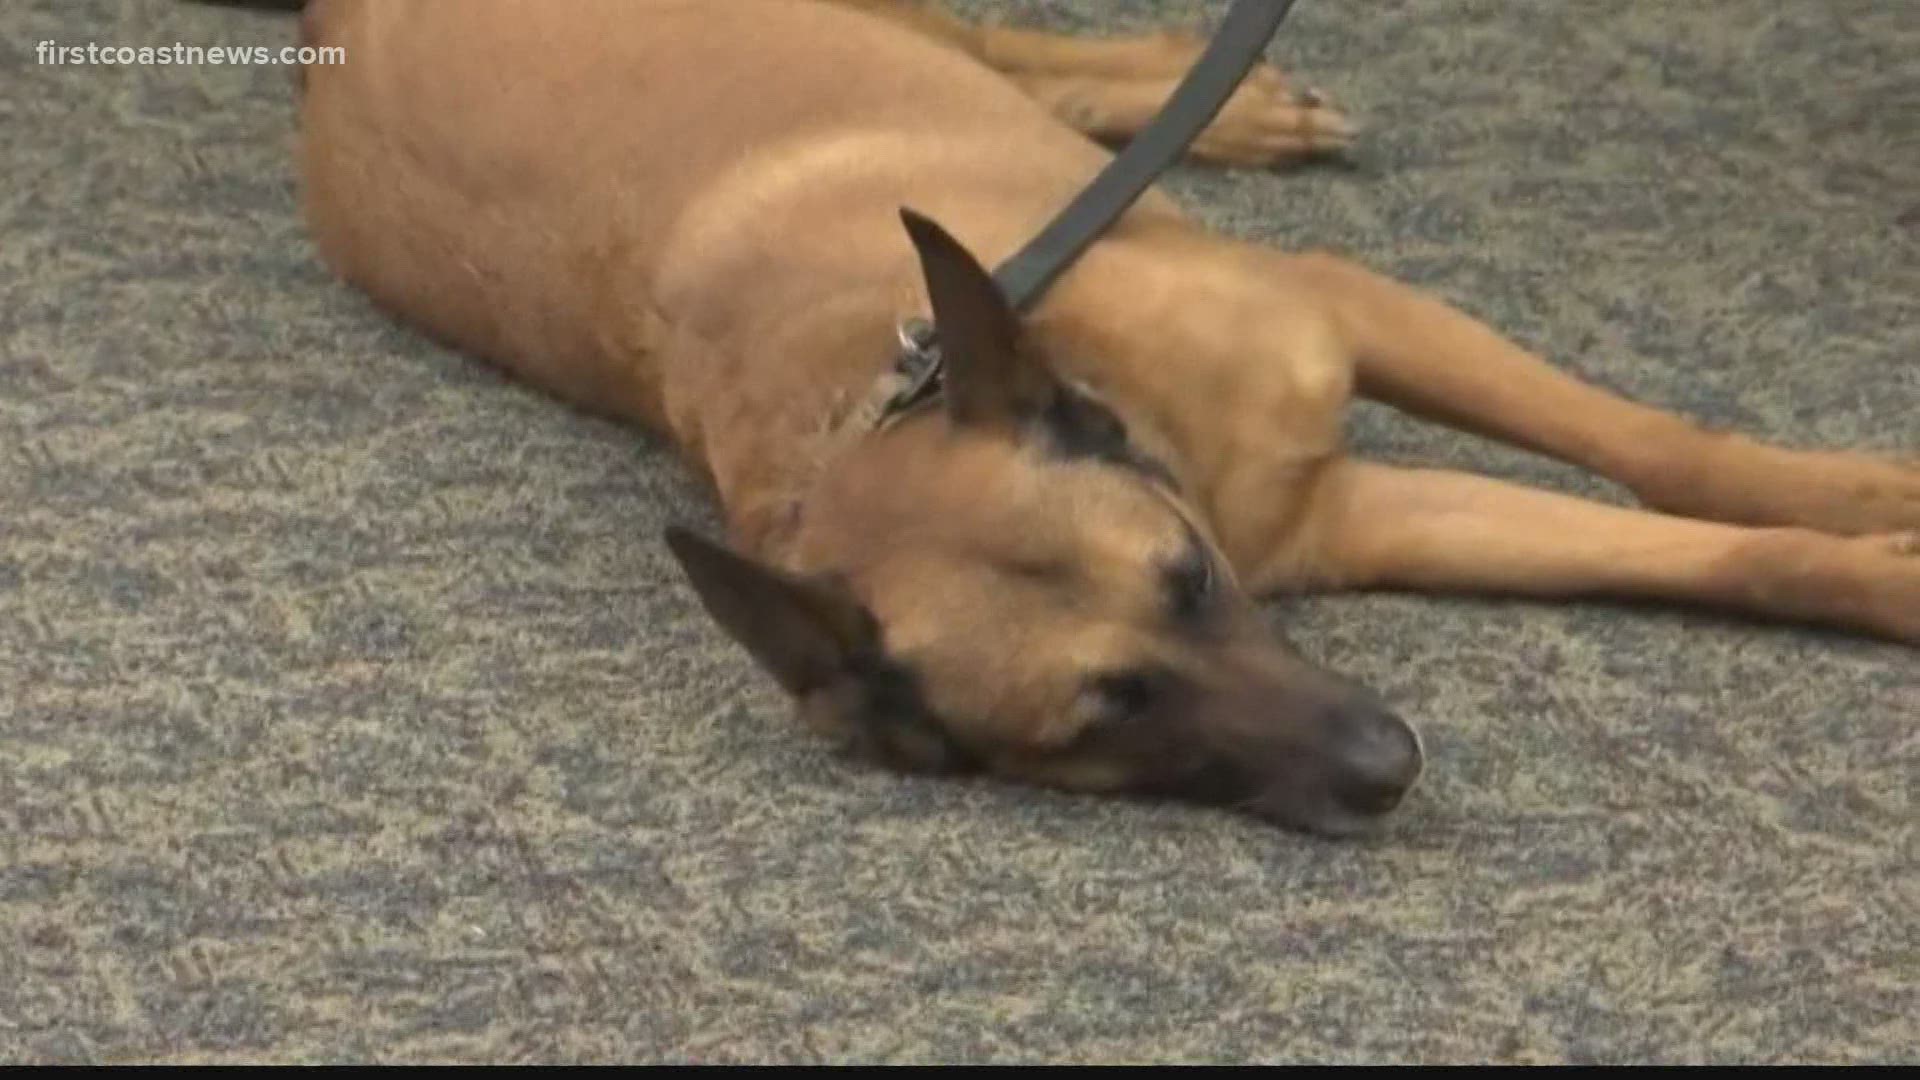 The bill allows for emergency rescue personnel to treat wounded police dogs in the field as well as transport them.